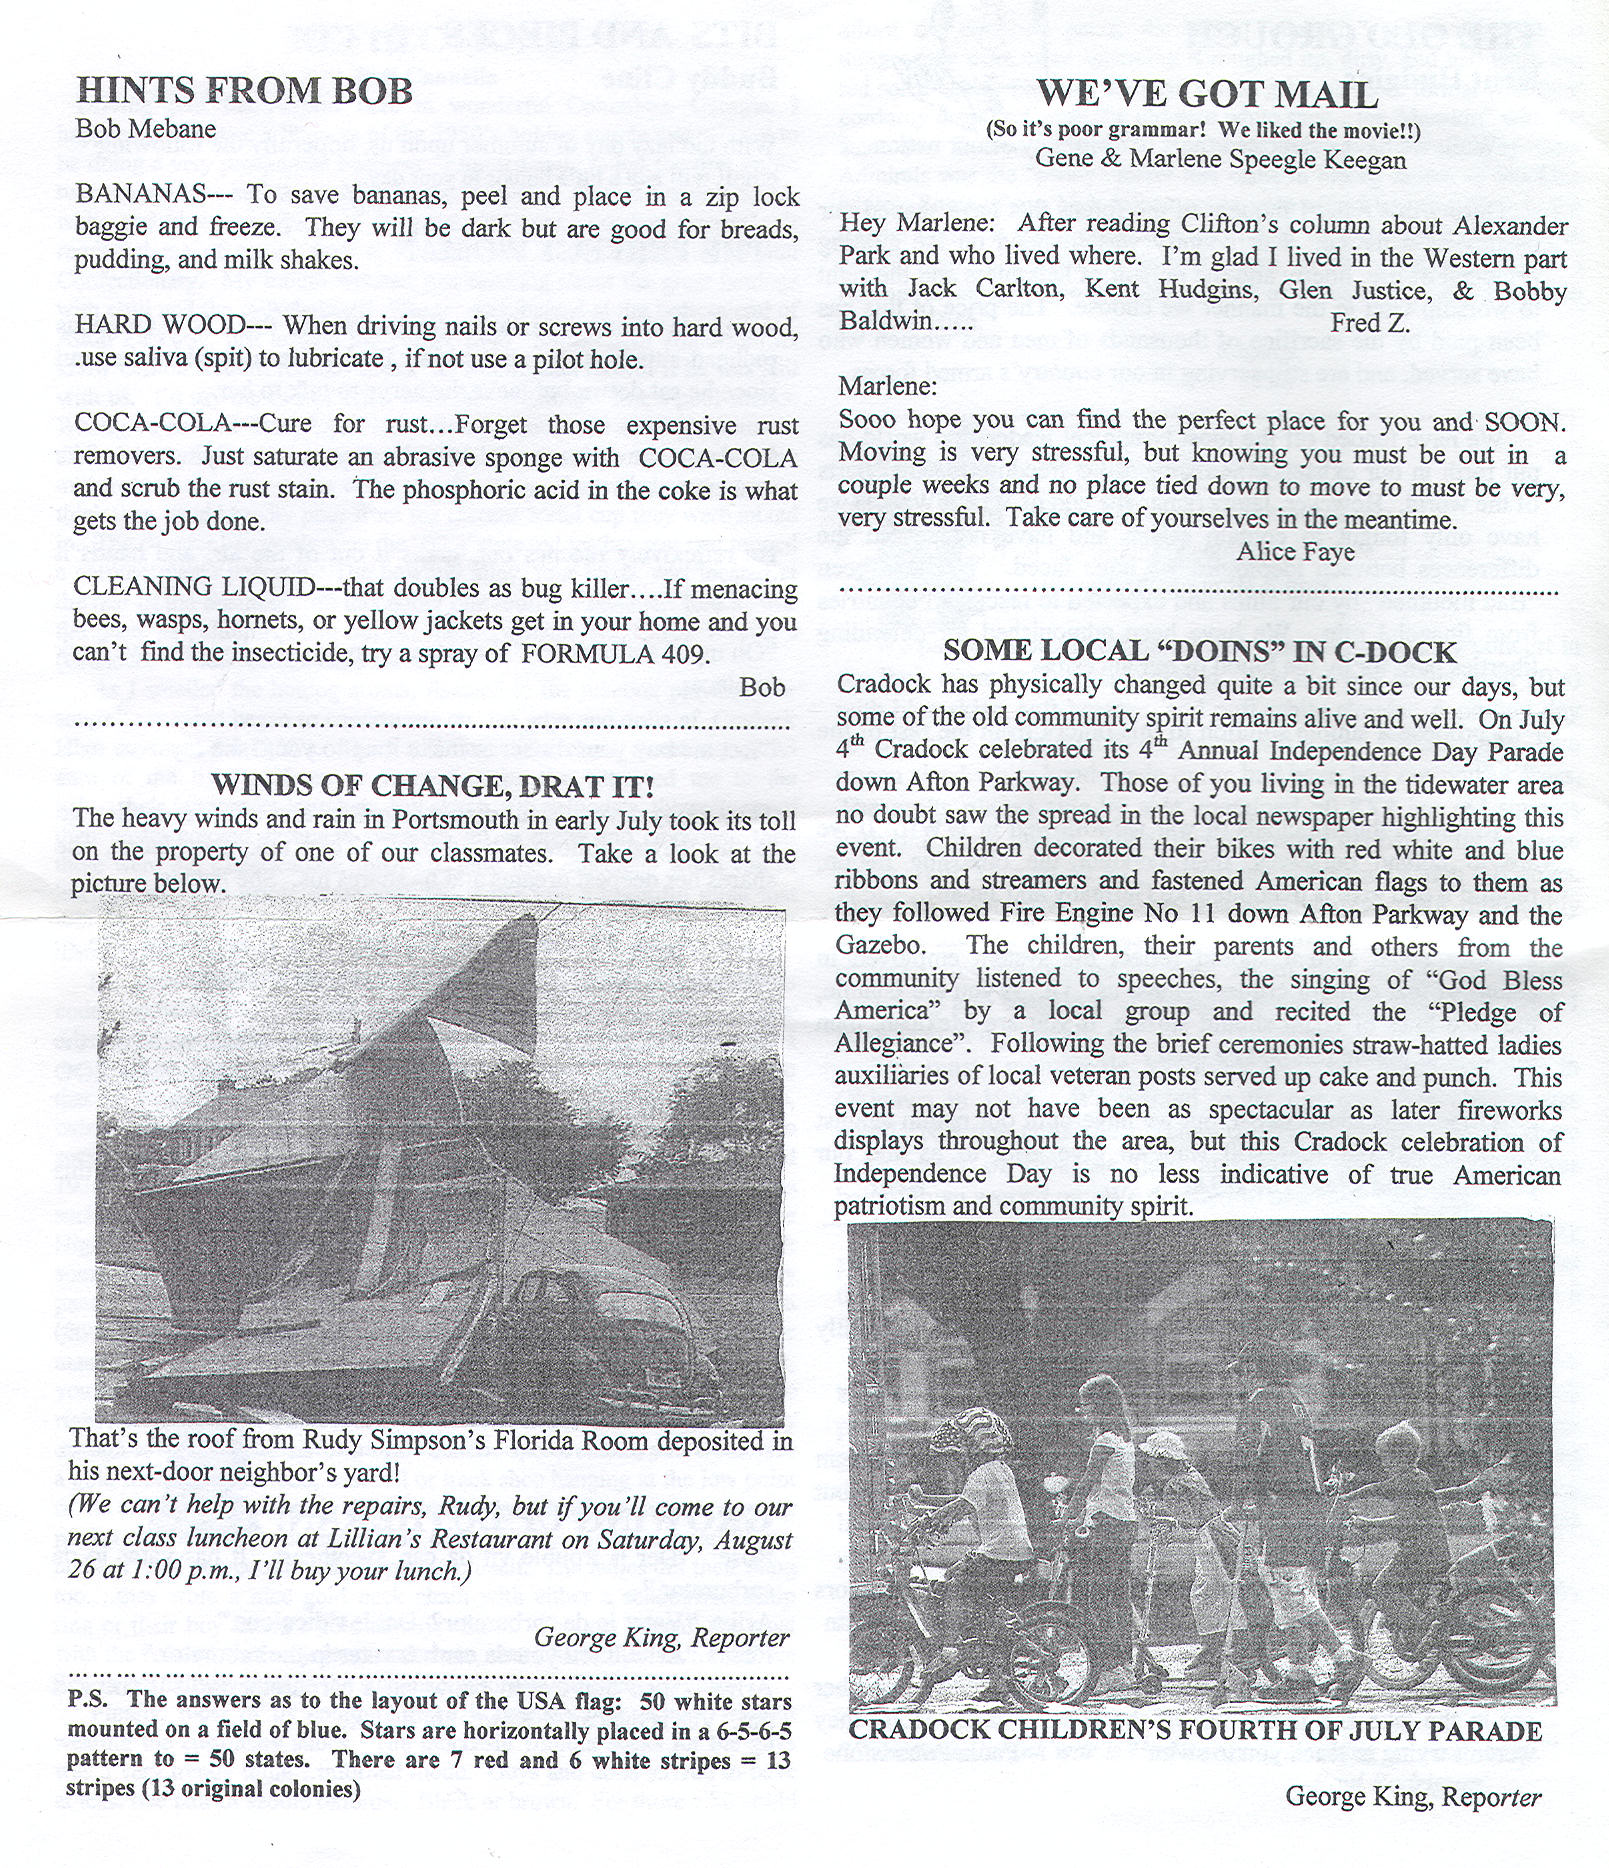 The Admiral - August 2006 - pg. 4